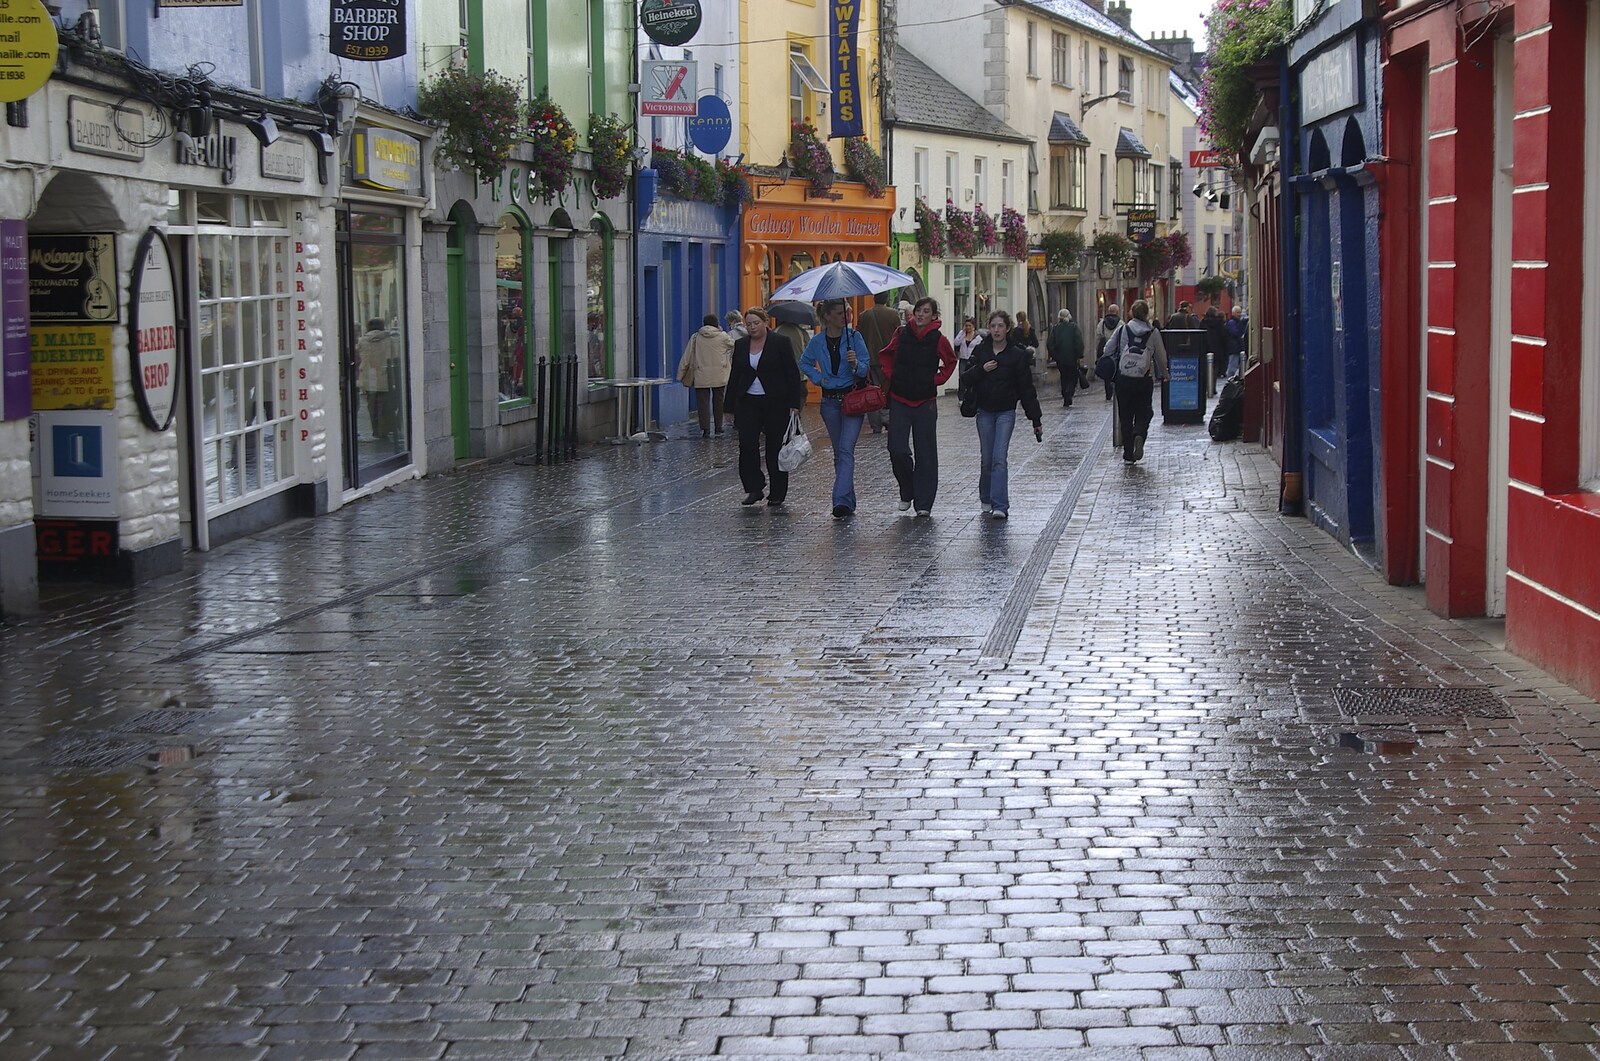 Kilkee to Galway, Connacht, Ireland - 23rd September 2007: The damp cobbles of Galway